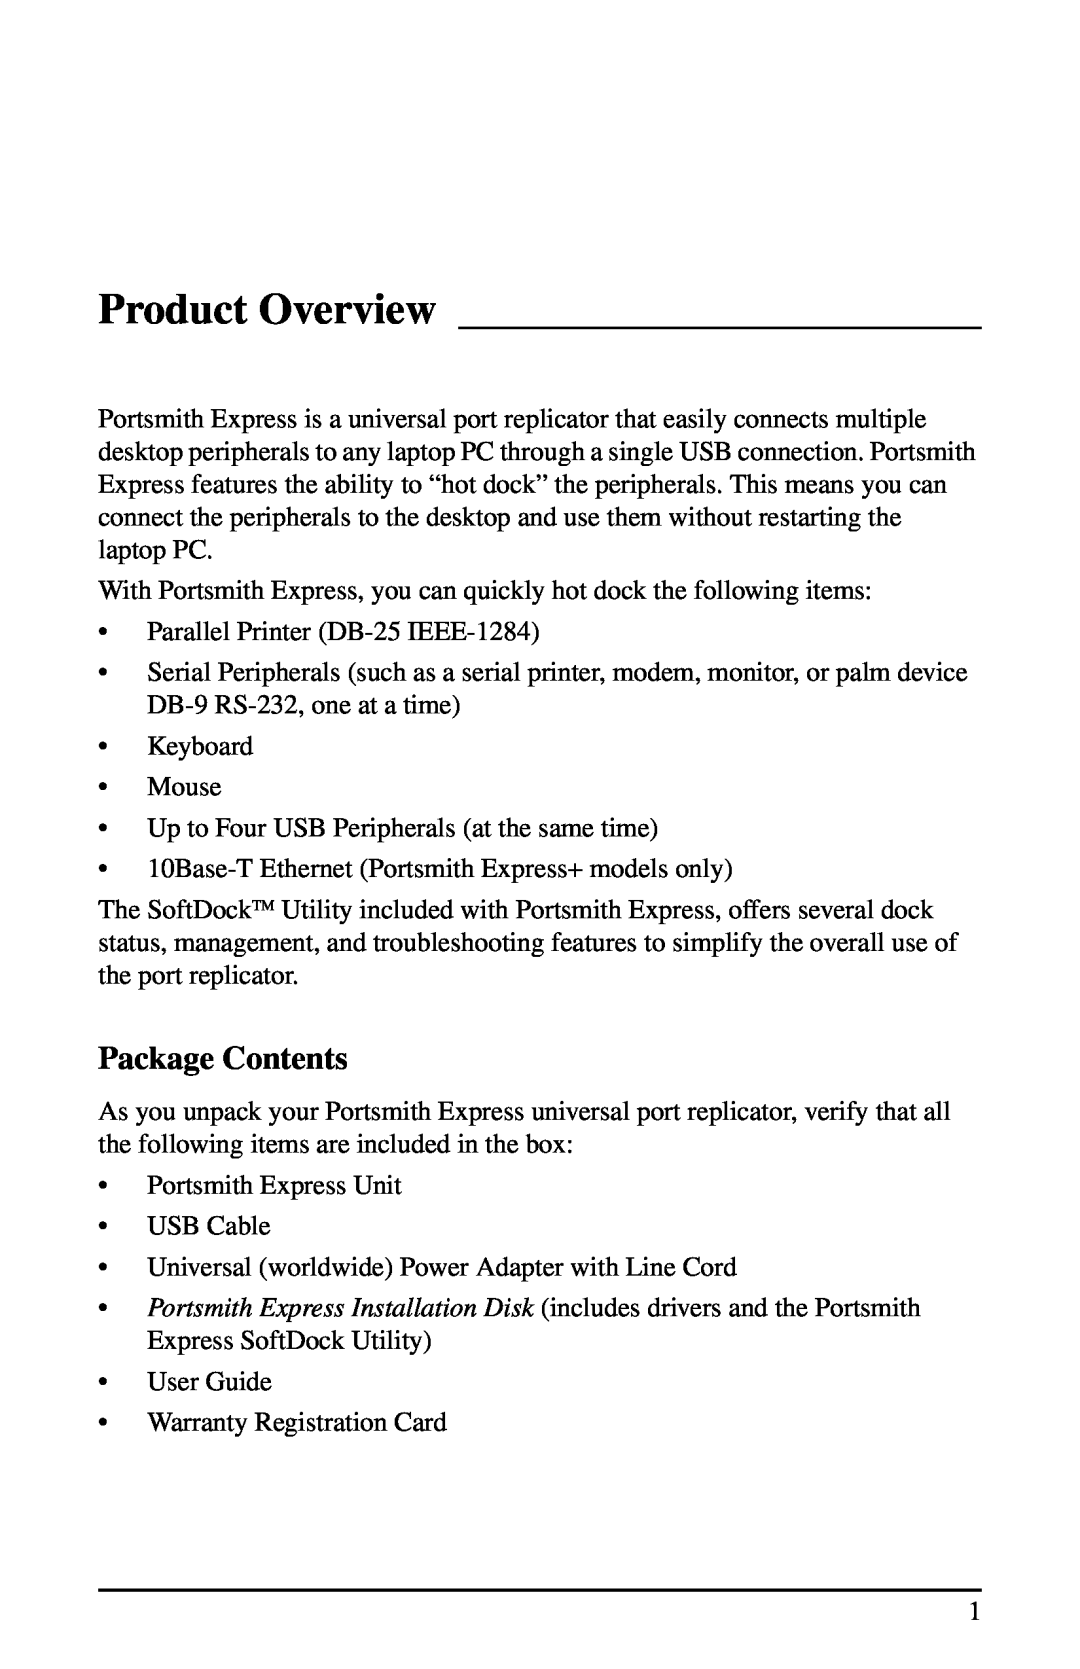 Portsmith USB user manual Product Overview, Package Contents 